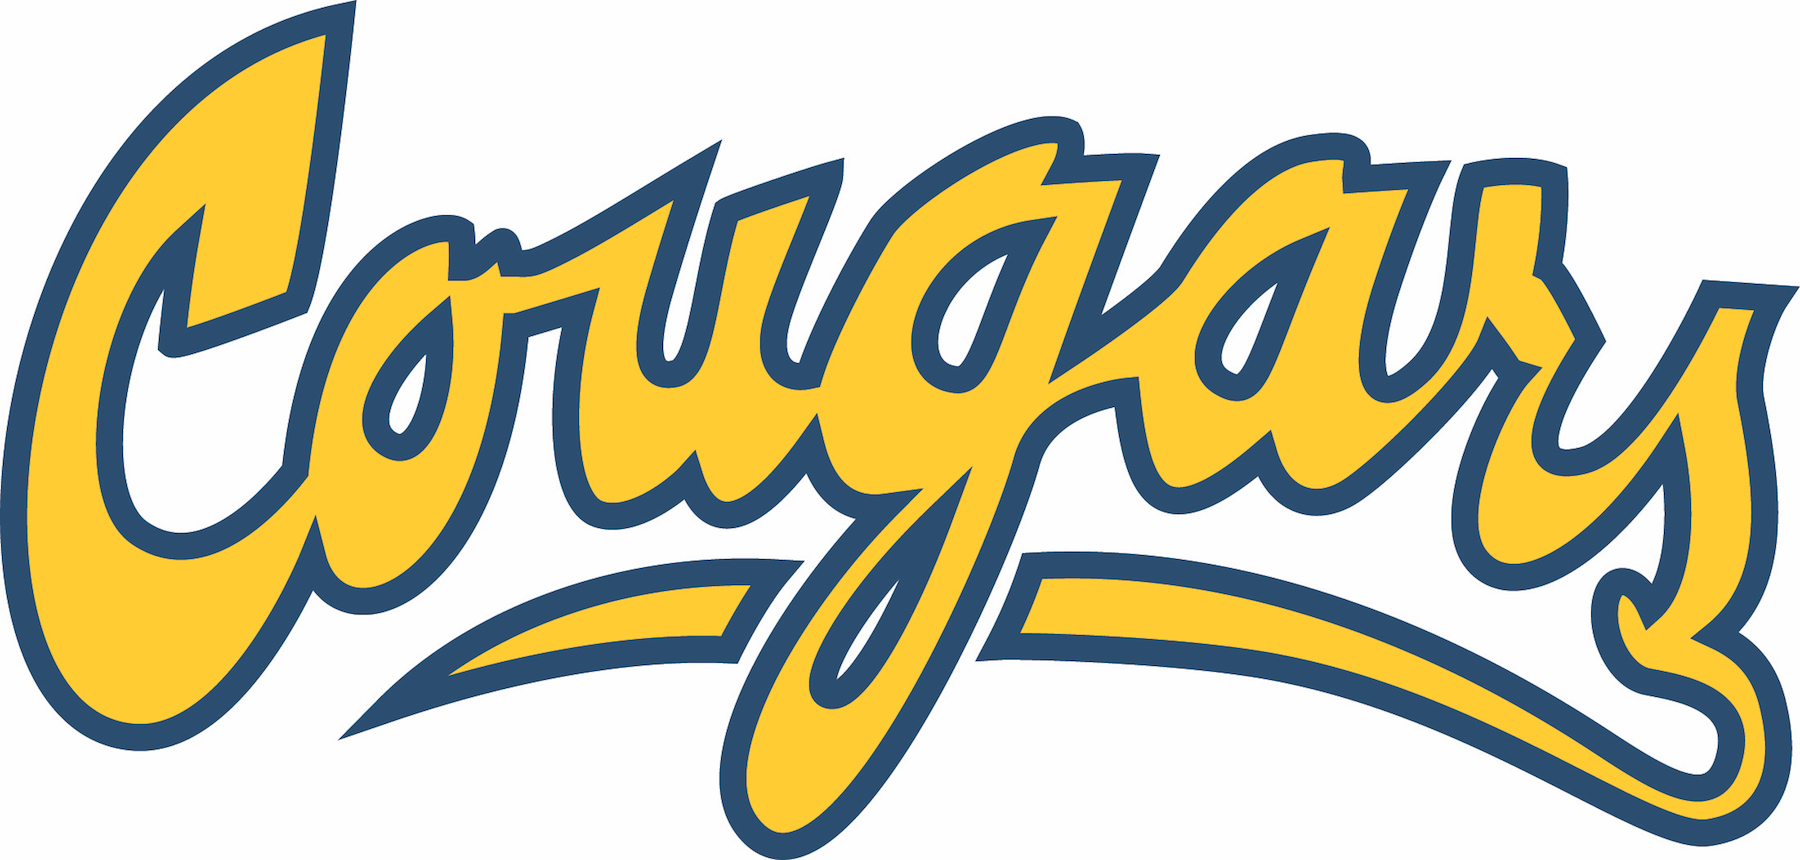 College of the Canyons Cougars logo.